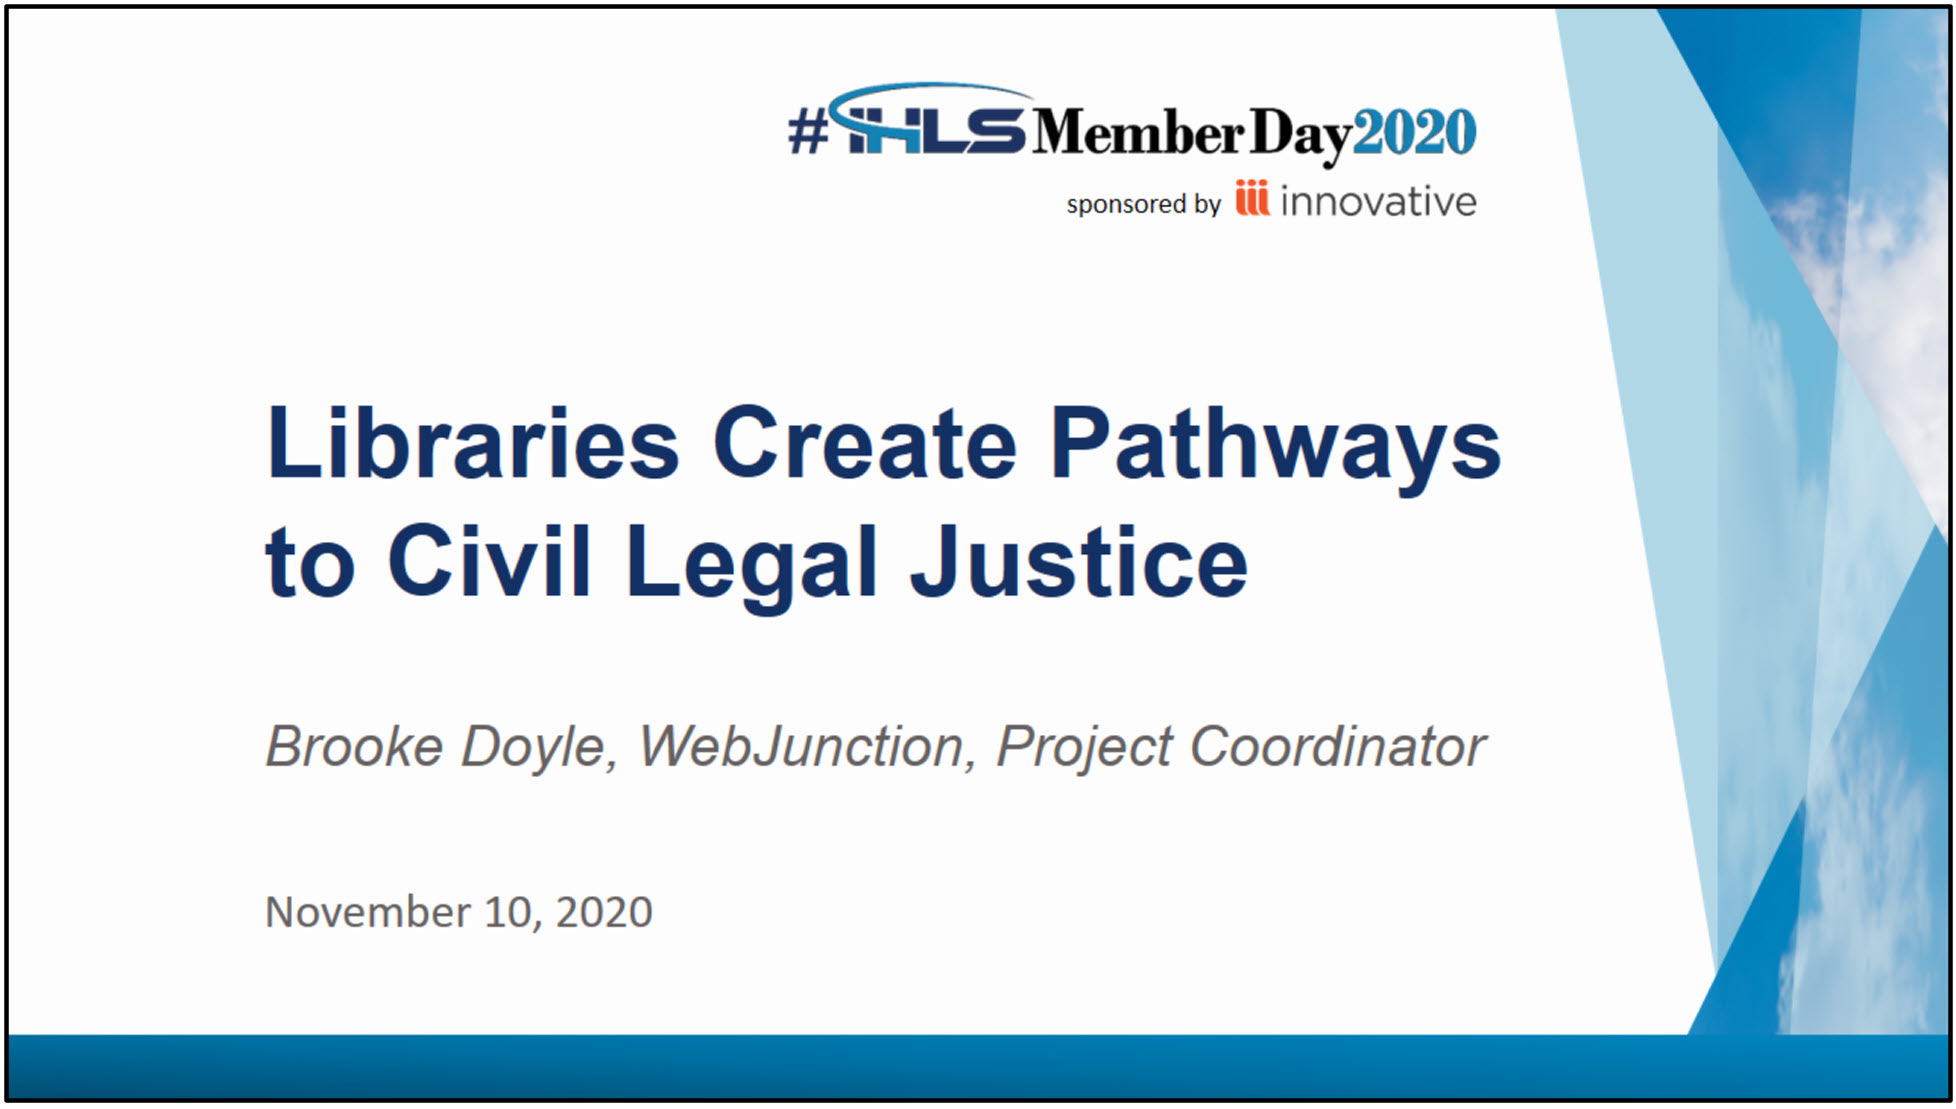 Libraries Create Pathways to Civil Legal Justice